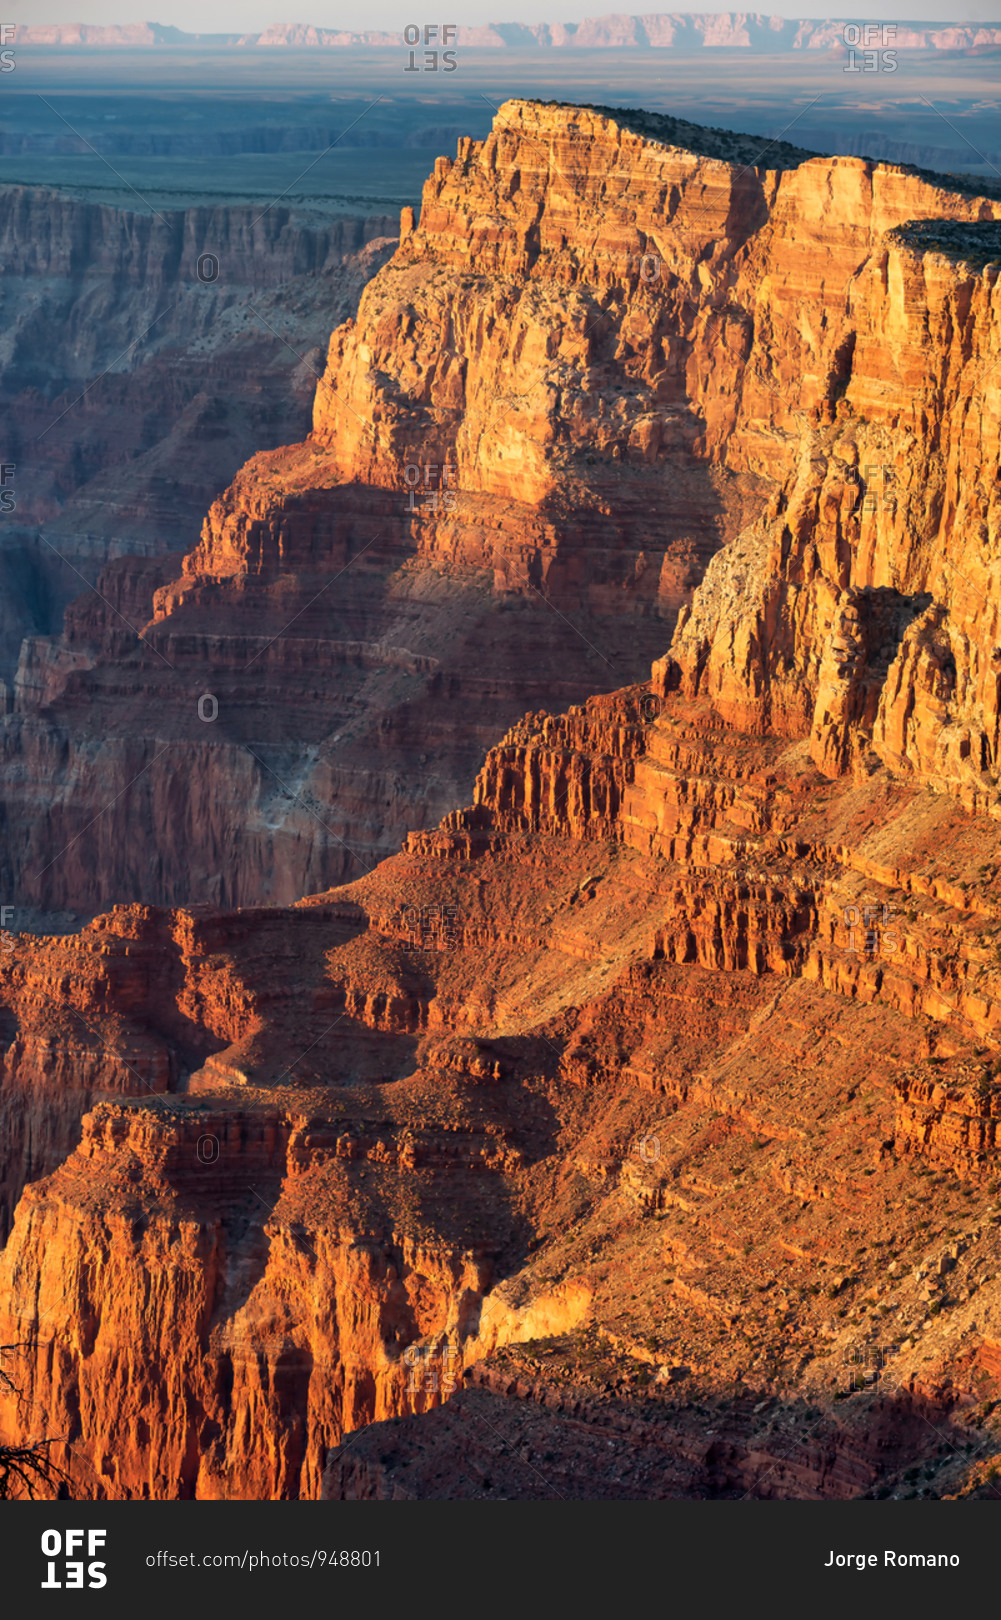 Scenic sunrise view of the Grand Canyon from the South Rim at Desert View